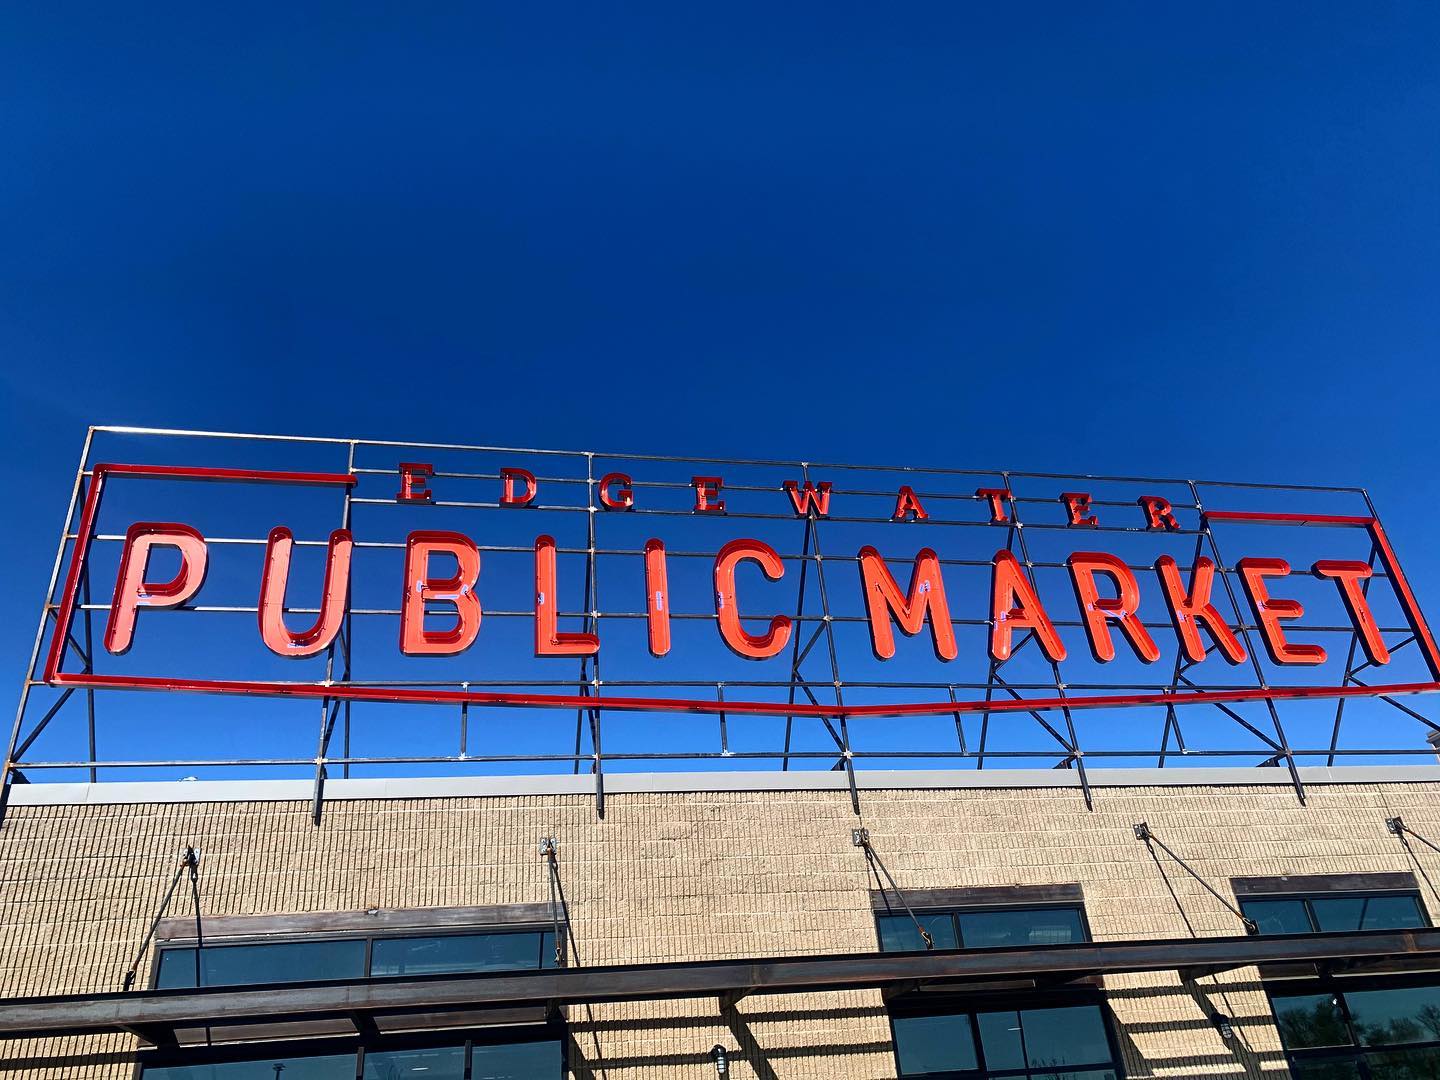 A photo of a sign reading “Edgewater Public Market” in red letters above the market building